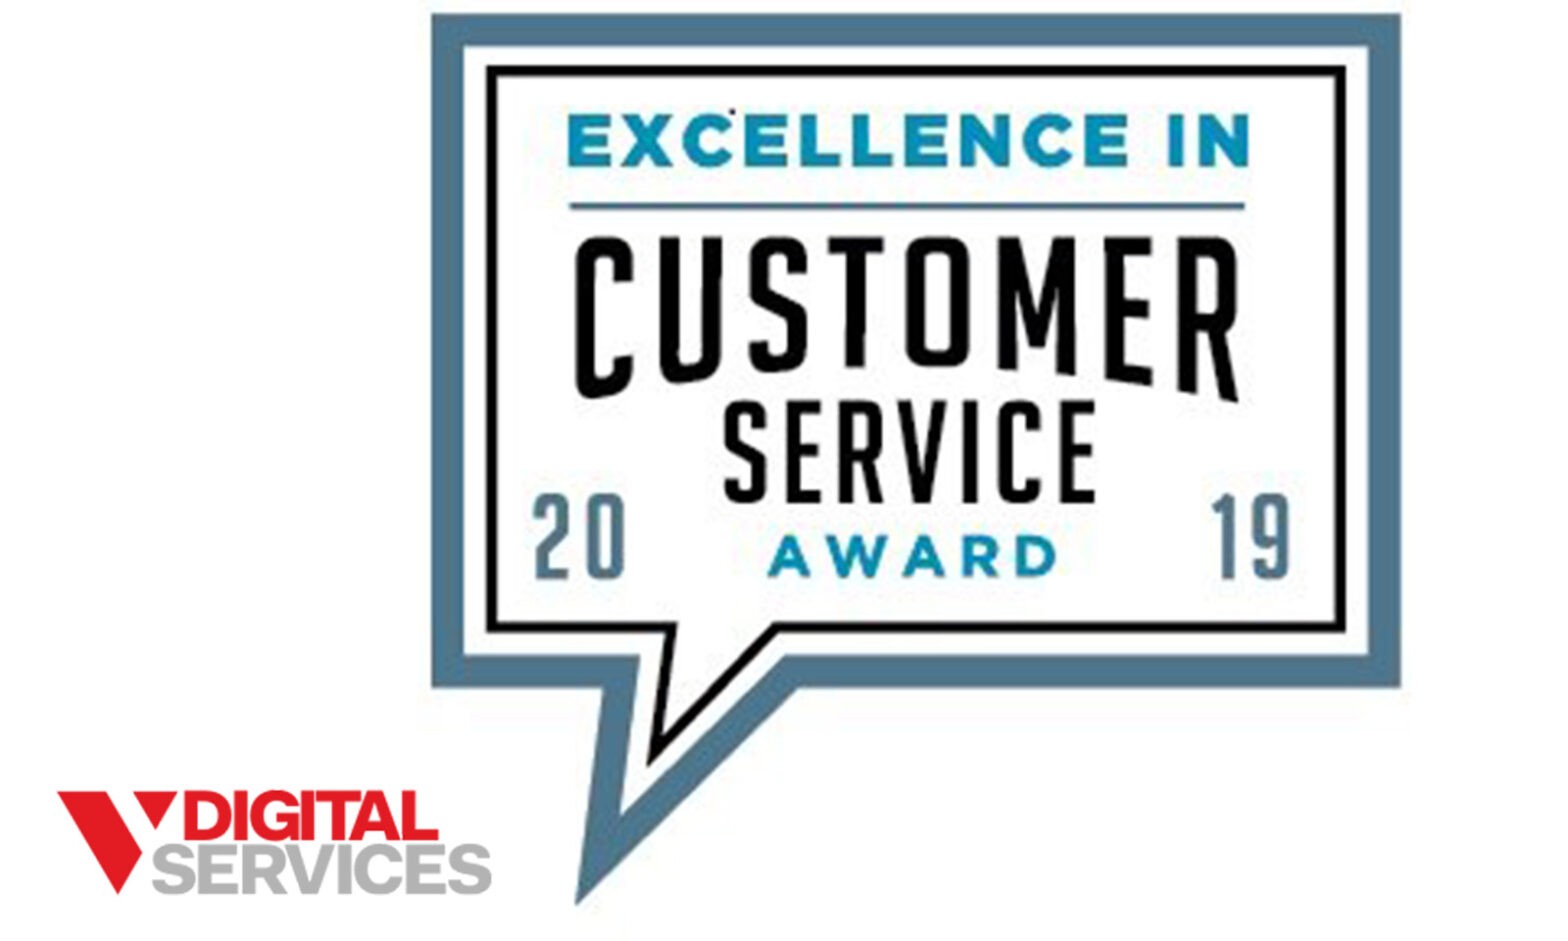 V DIGITAL SERVICES WINS EXCELLENCE IN CUSTOMER SERVICE AWARD